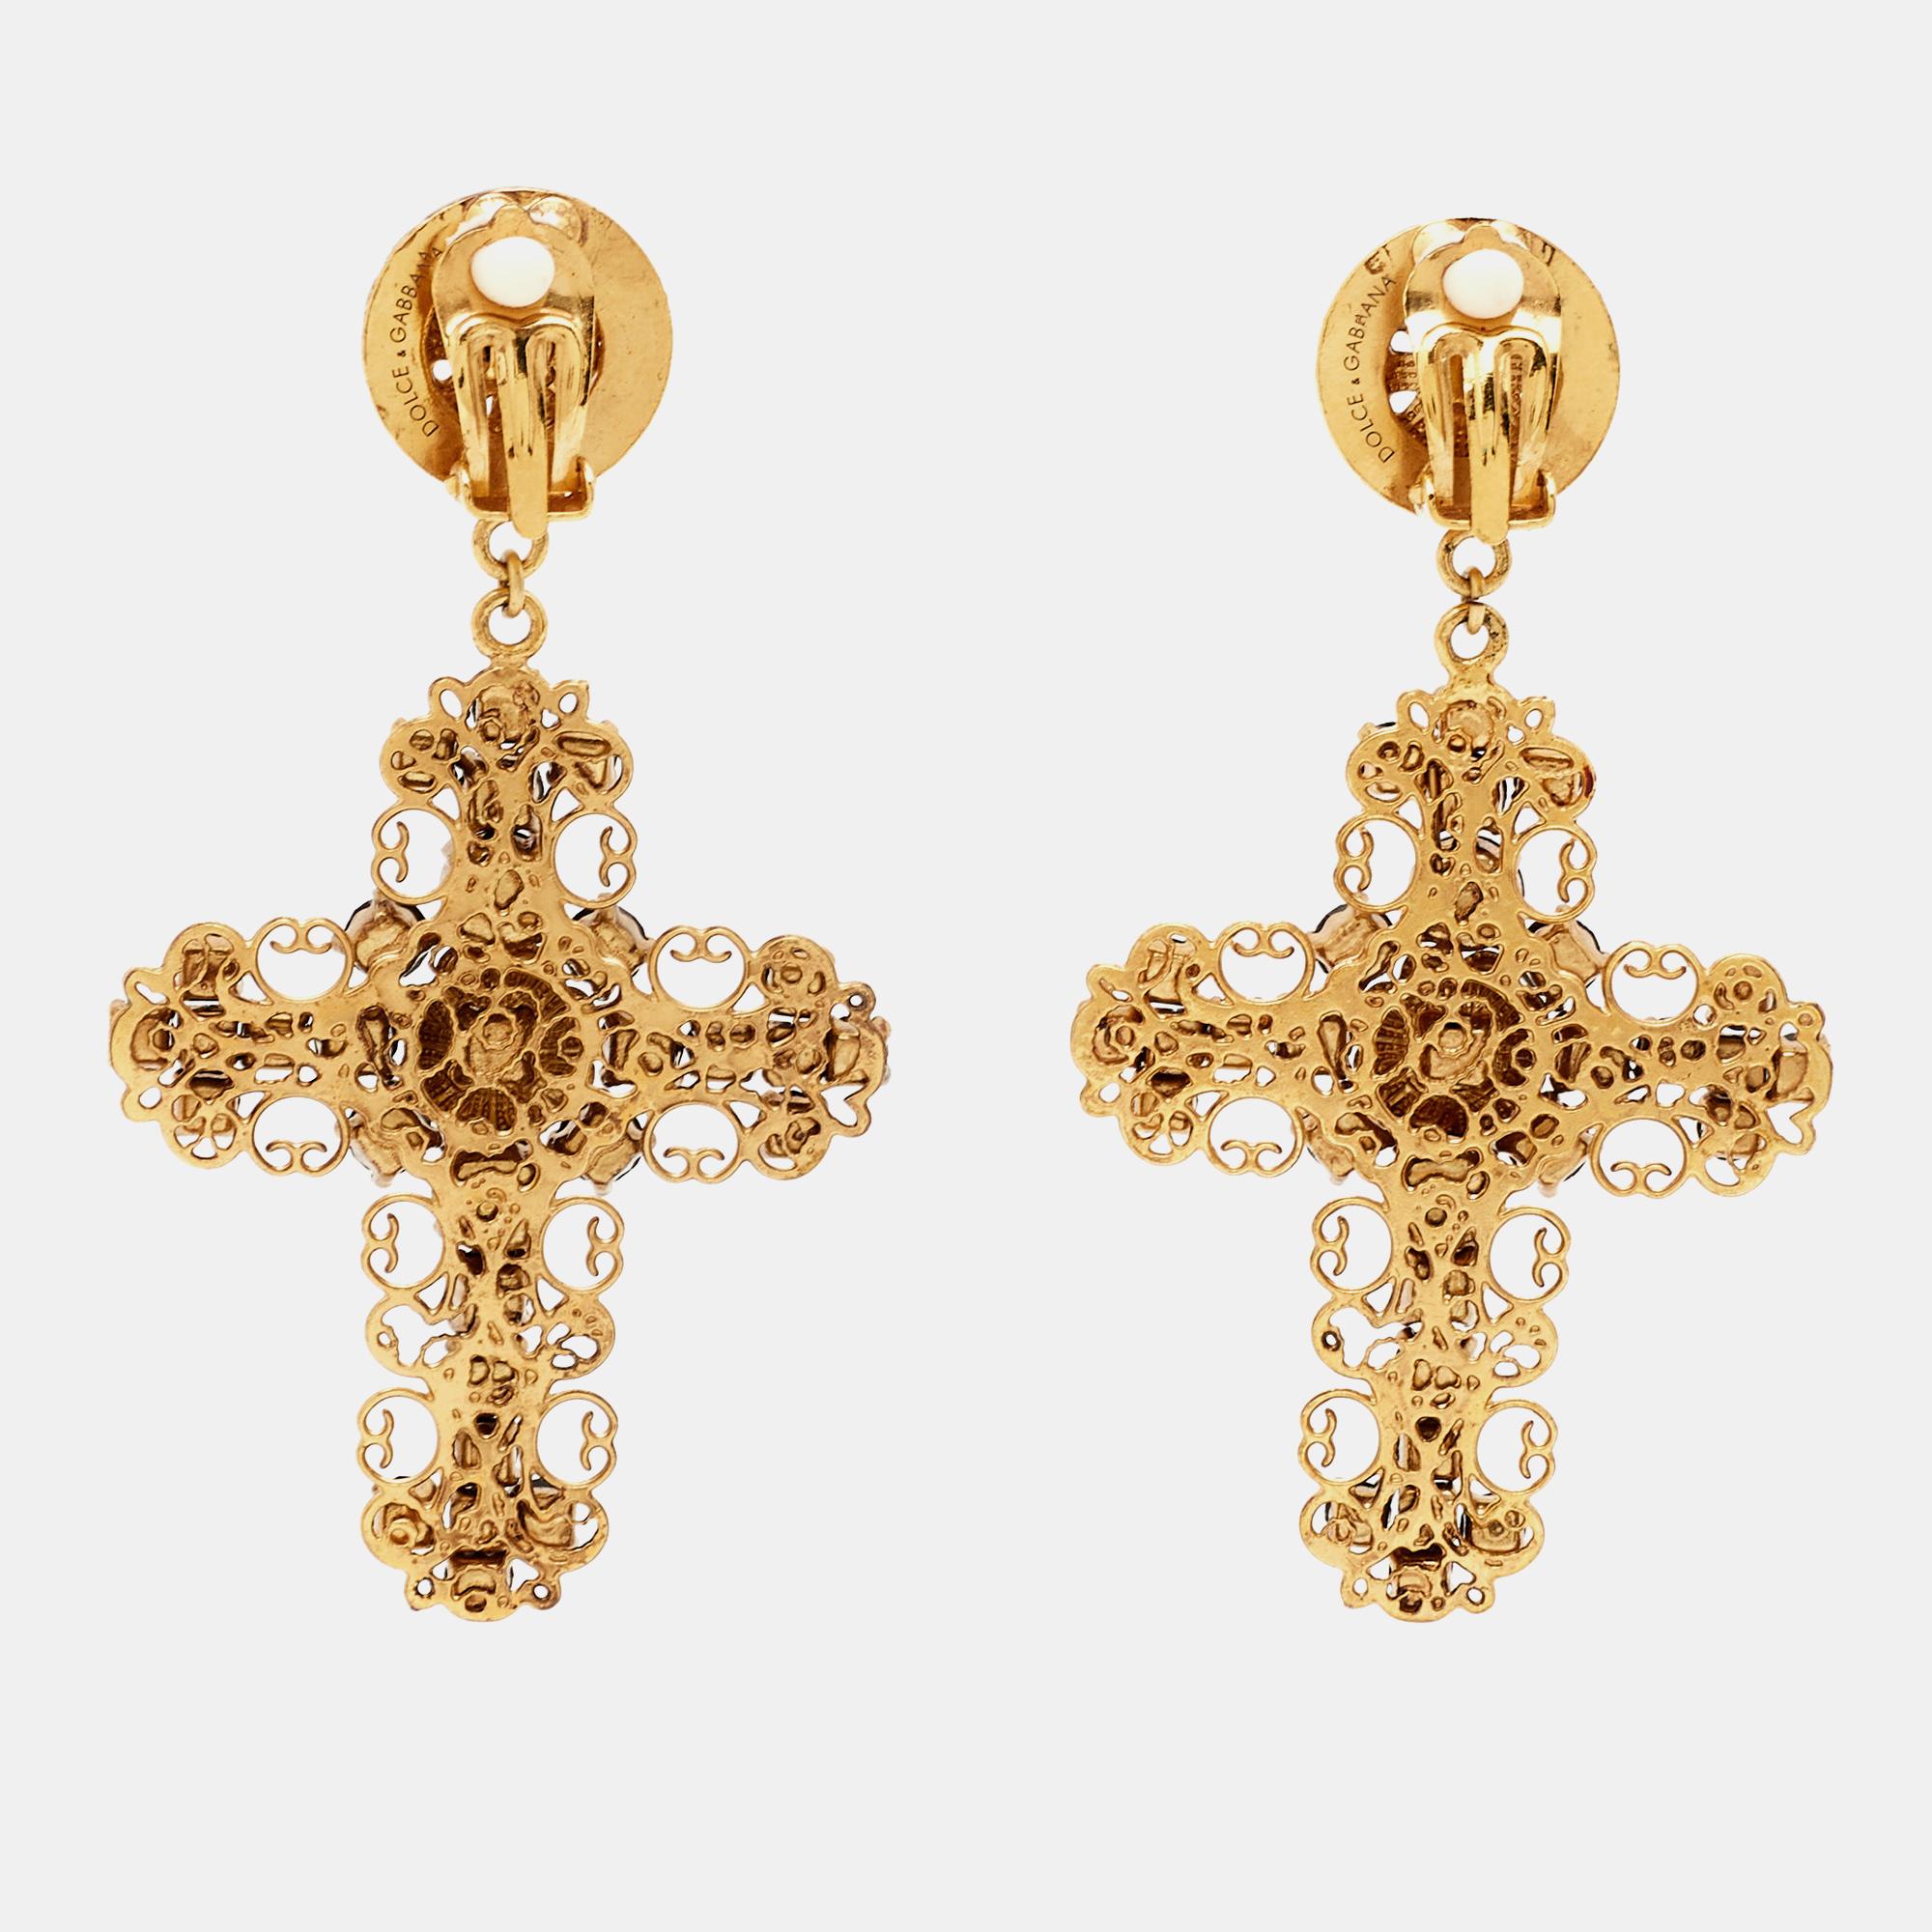 A feminine flair and a chic appeal characterize these stunning Dolce & Gabbana earrings. Sculpted from high-grade materials, they will look beautiful when you style them with your outfits and other accessories.

